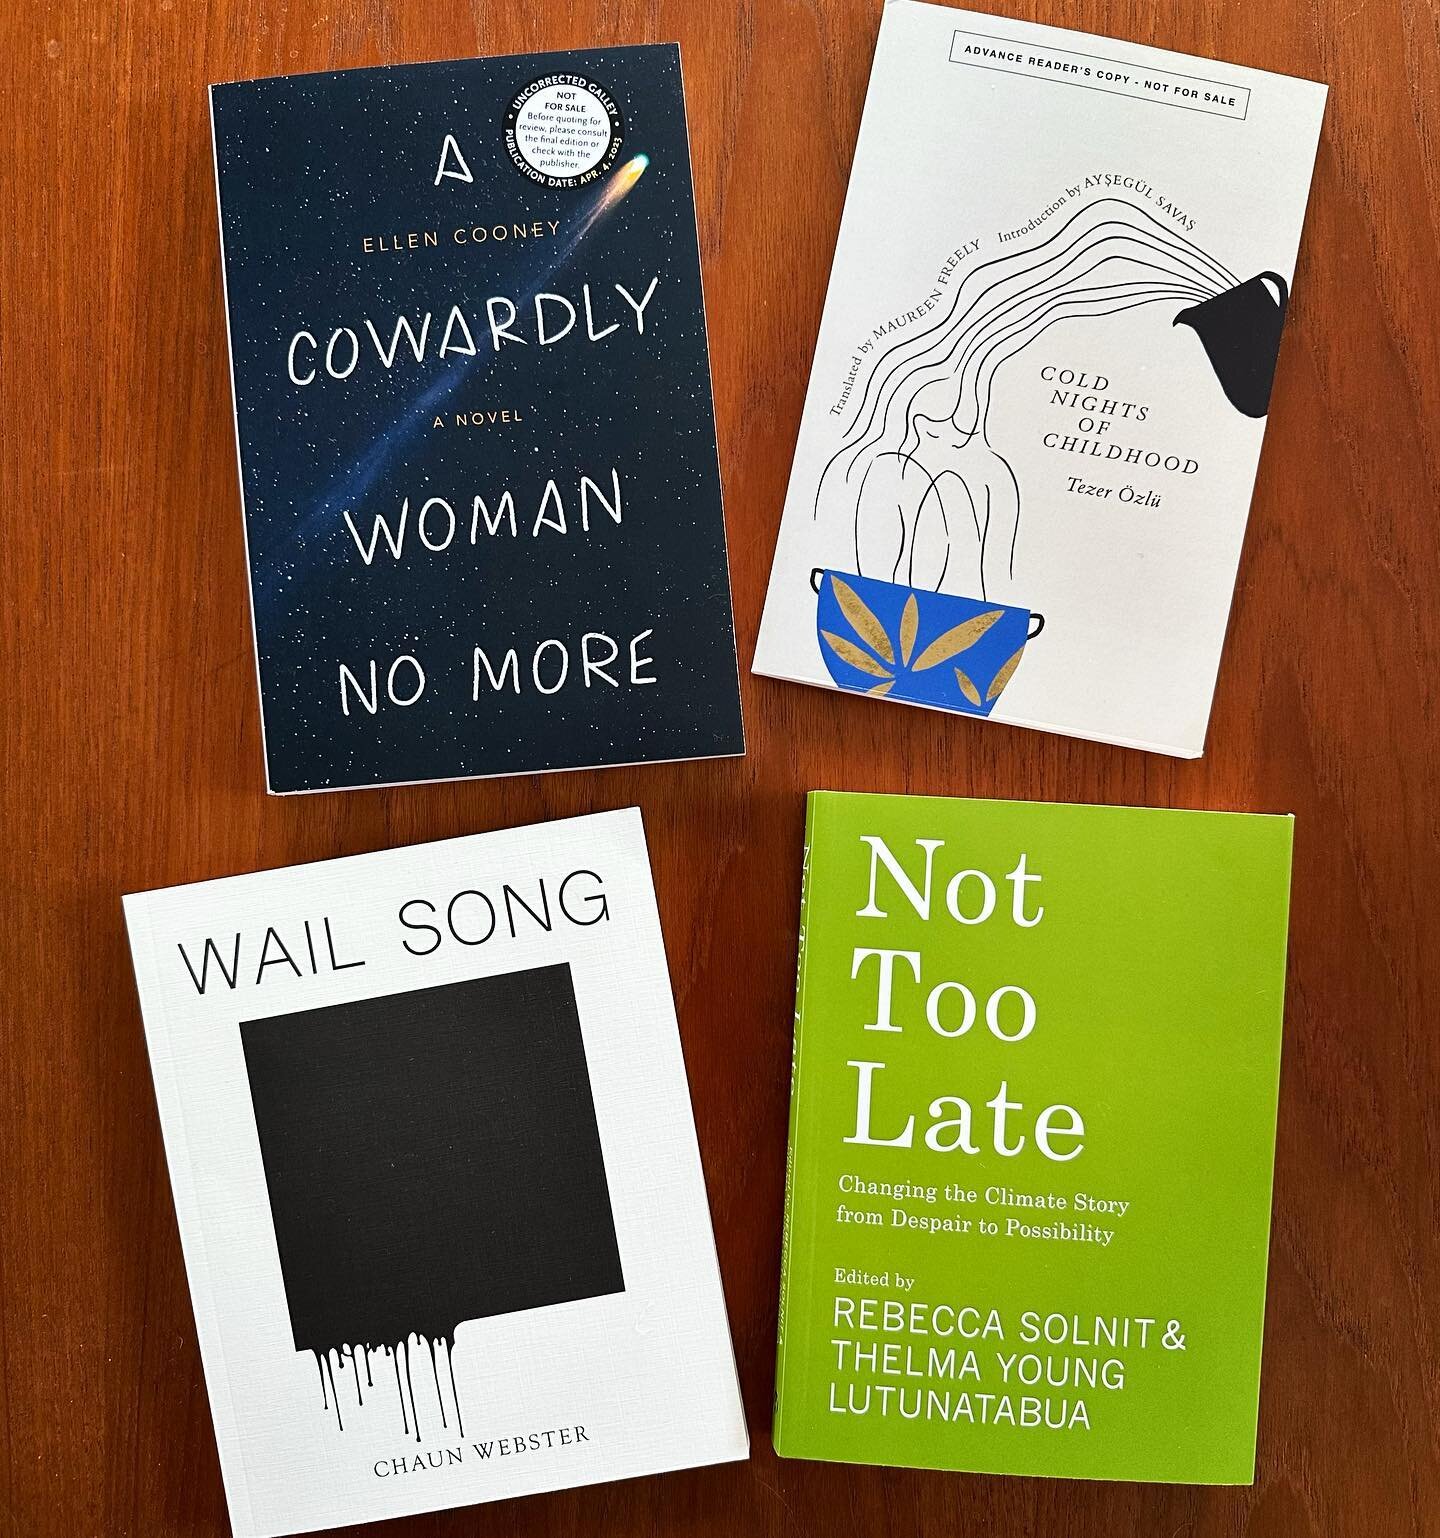 Support small presses! These are a few of the many gems coming out in April and May. 🤩🤩🤩
@coffeehousepress @transitbooks @blackoceanpublishing @haymarketbooks (Also, a special shout out to Mpls poet and bookseller Chaun Webster!!!)